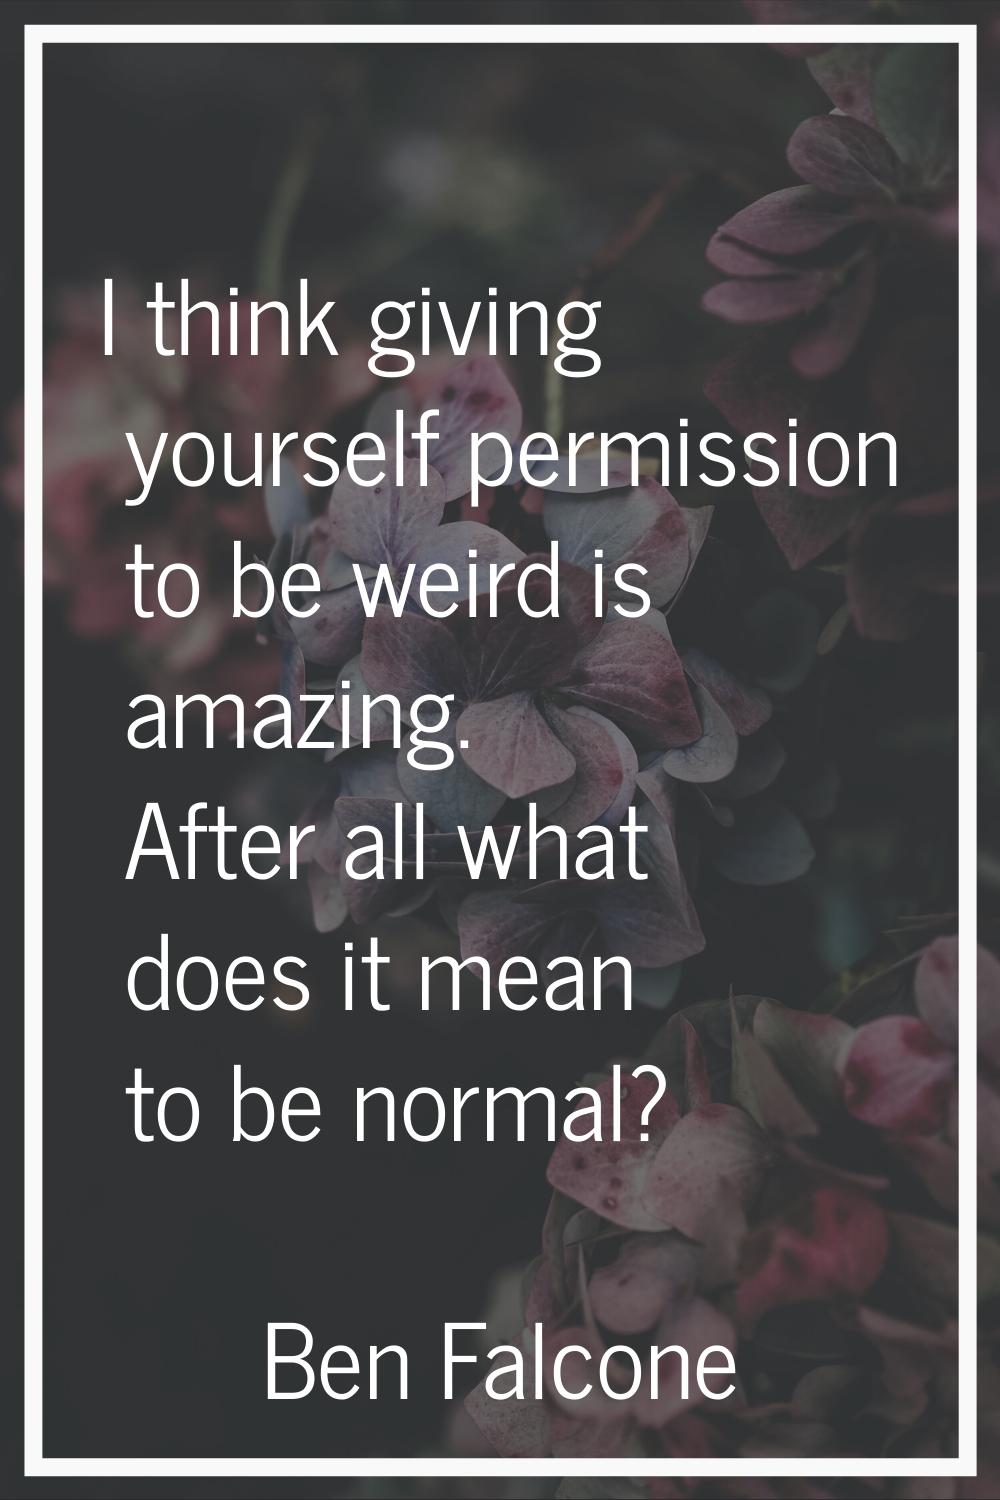 I think giving yourself permission to be weird is amazing. After all what does it mean to be normal